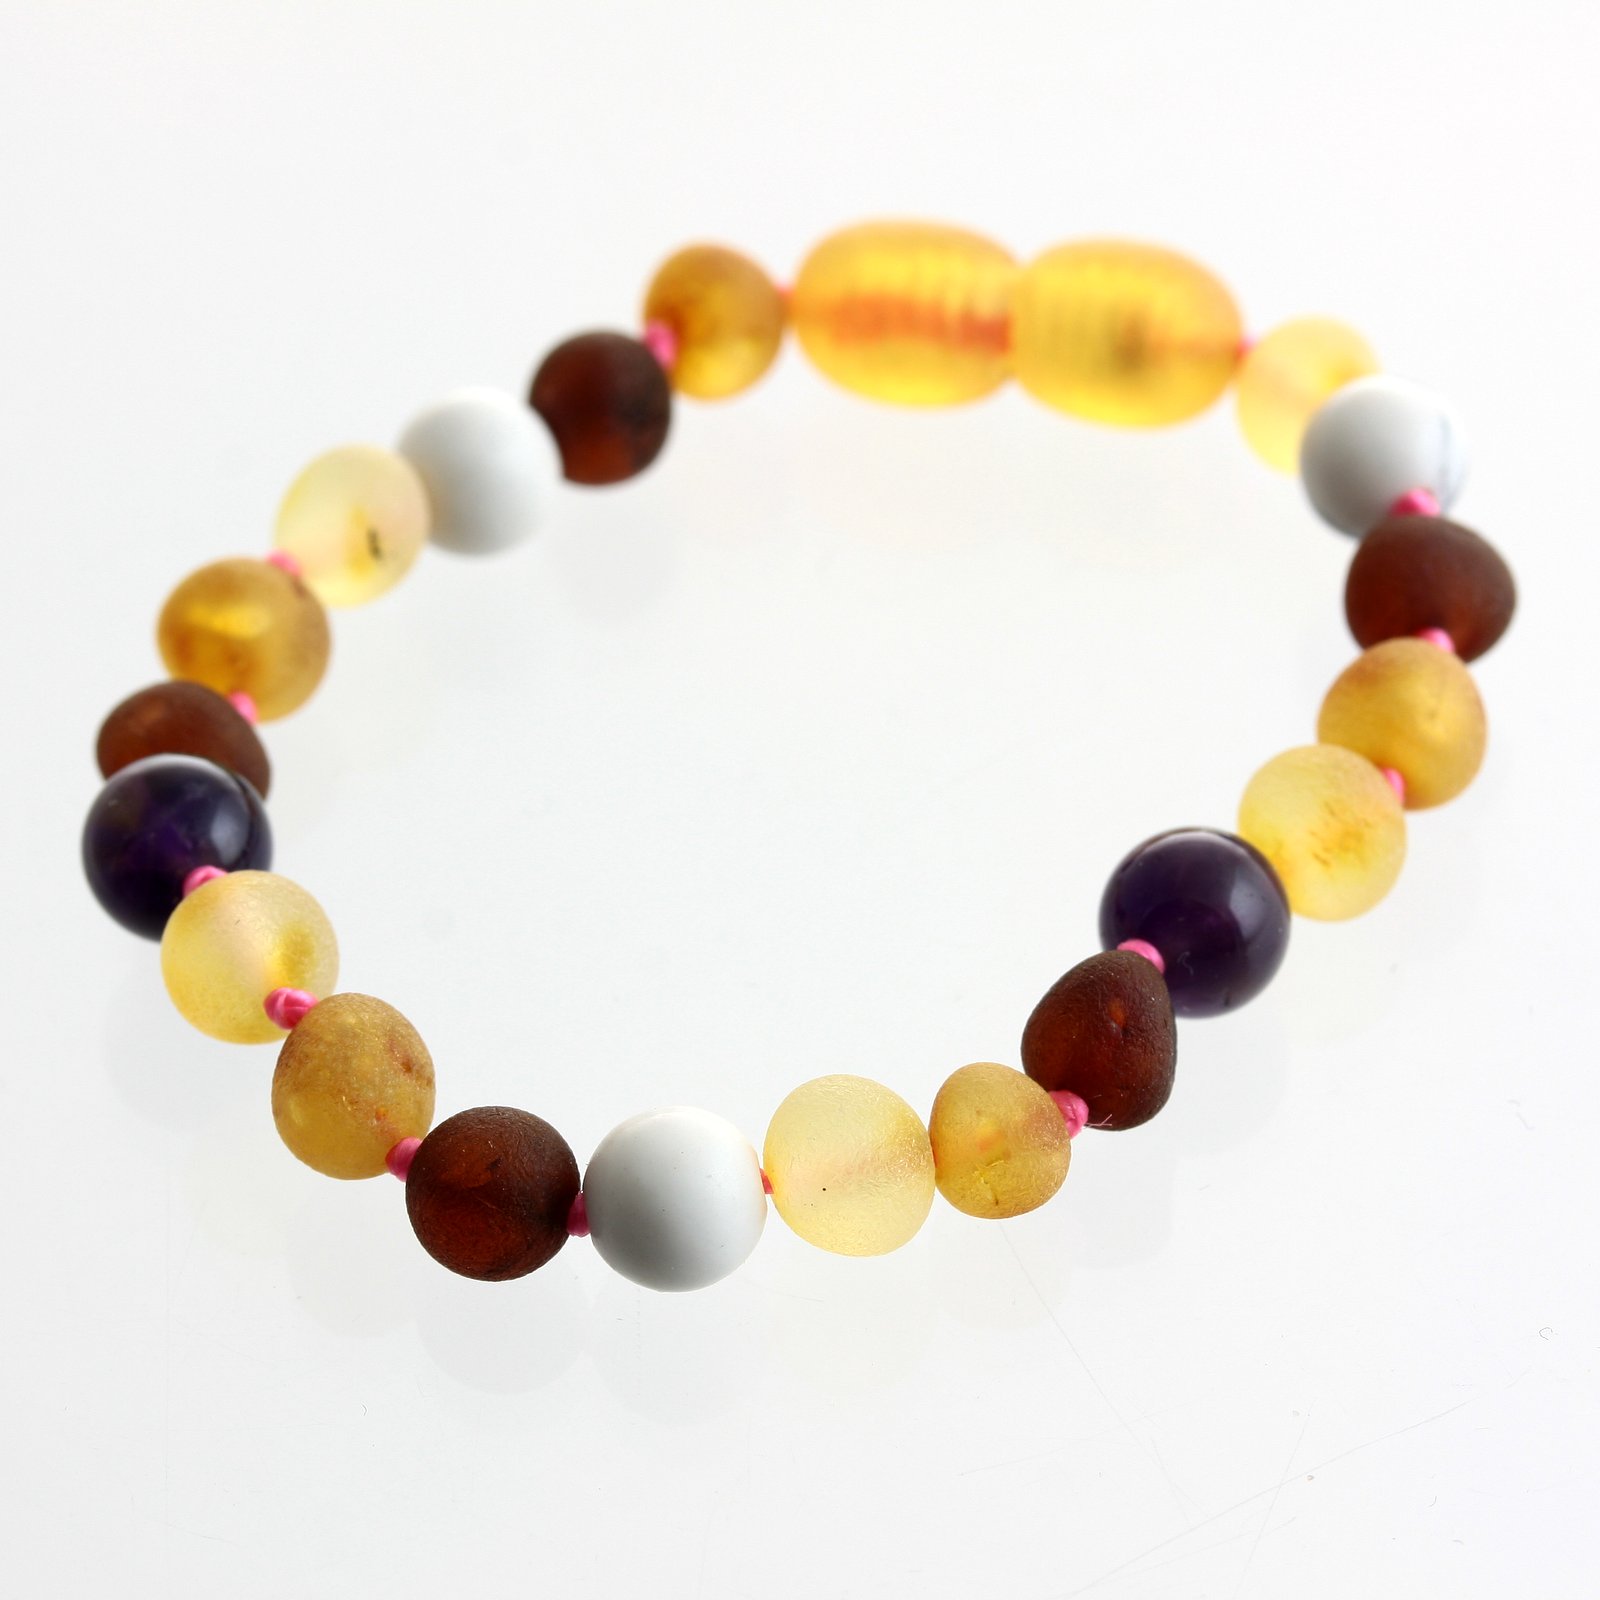 Natural Baltic Amber Raw Unpolished Beads Bracelets Lot 10 Brown Color 